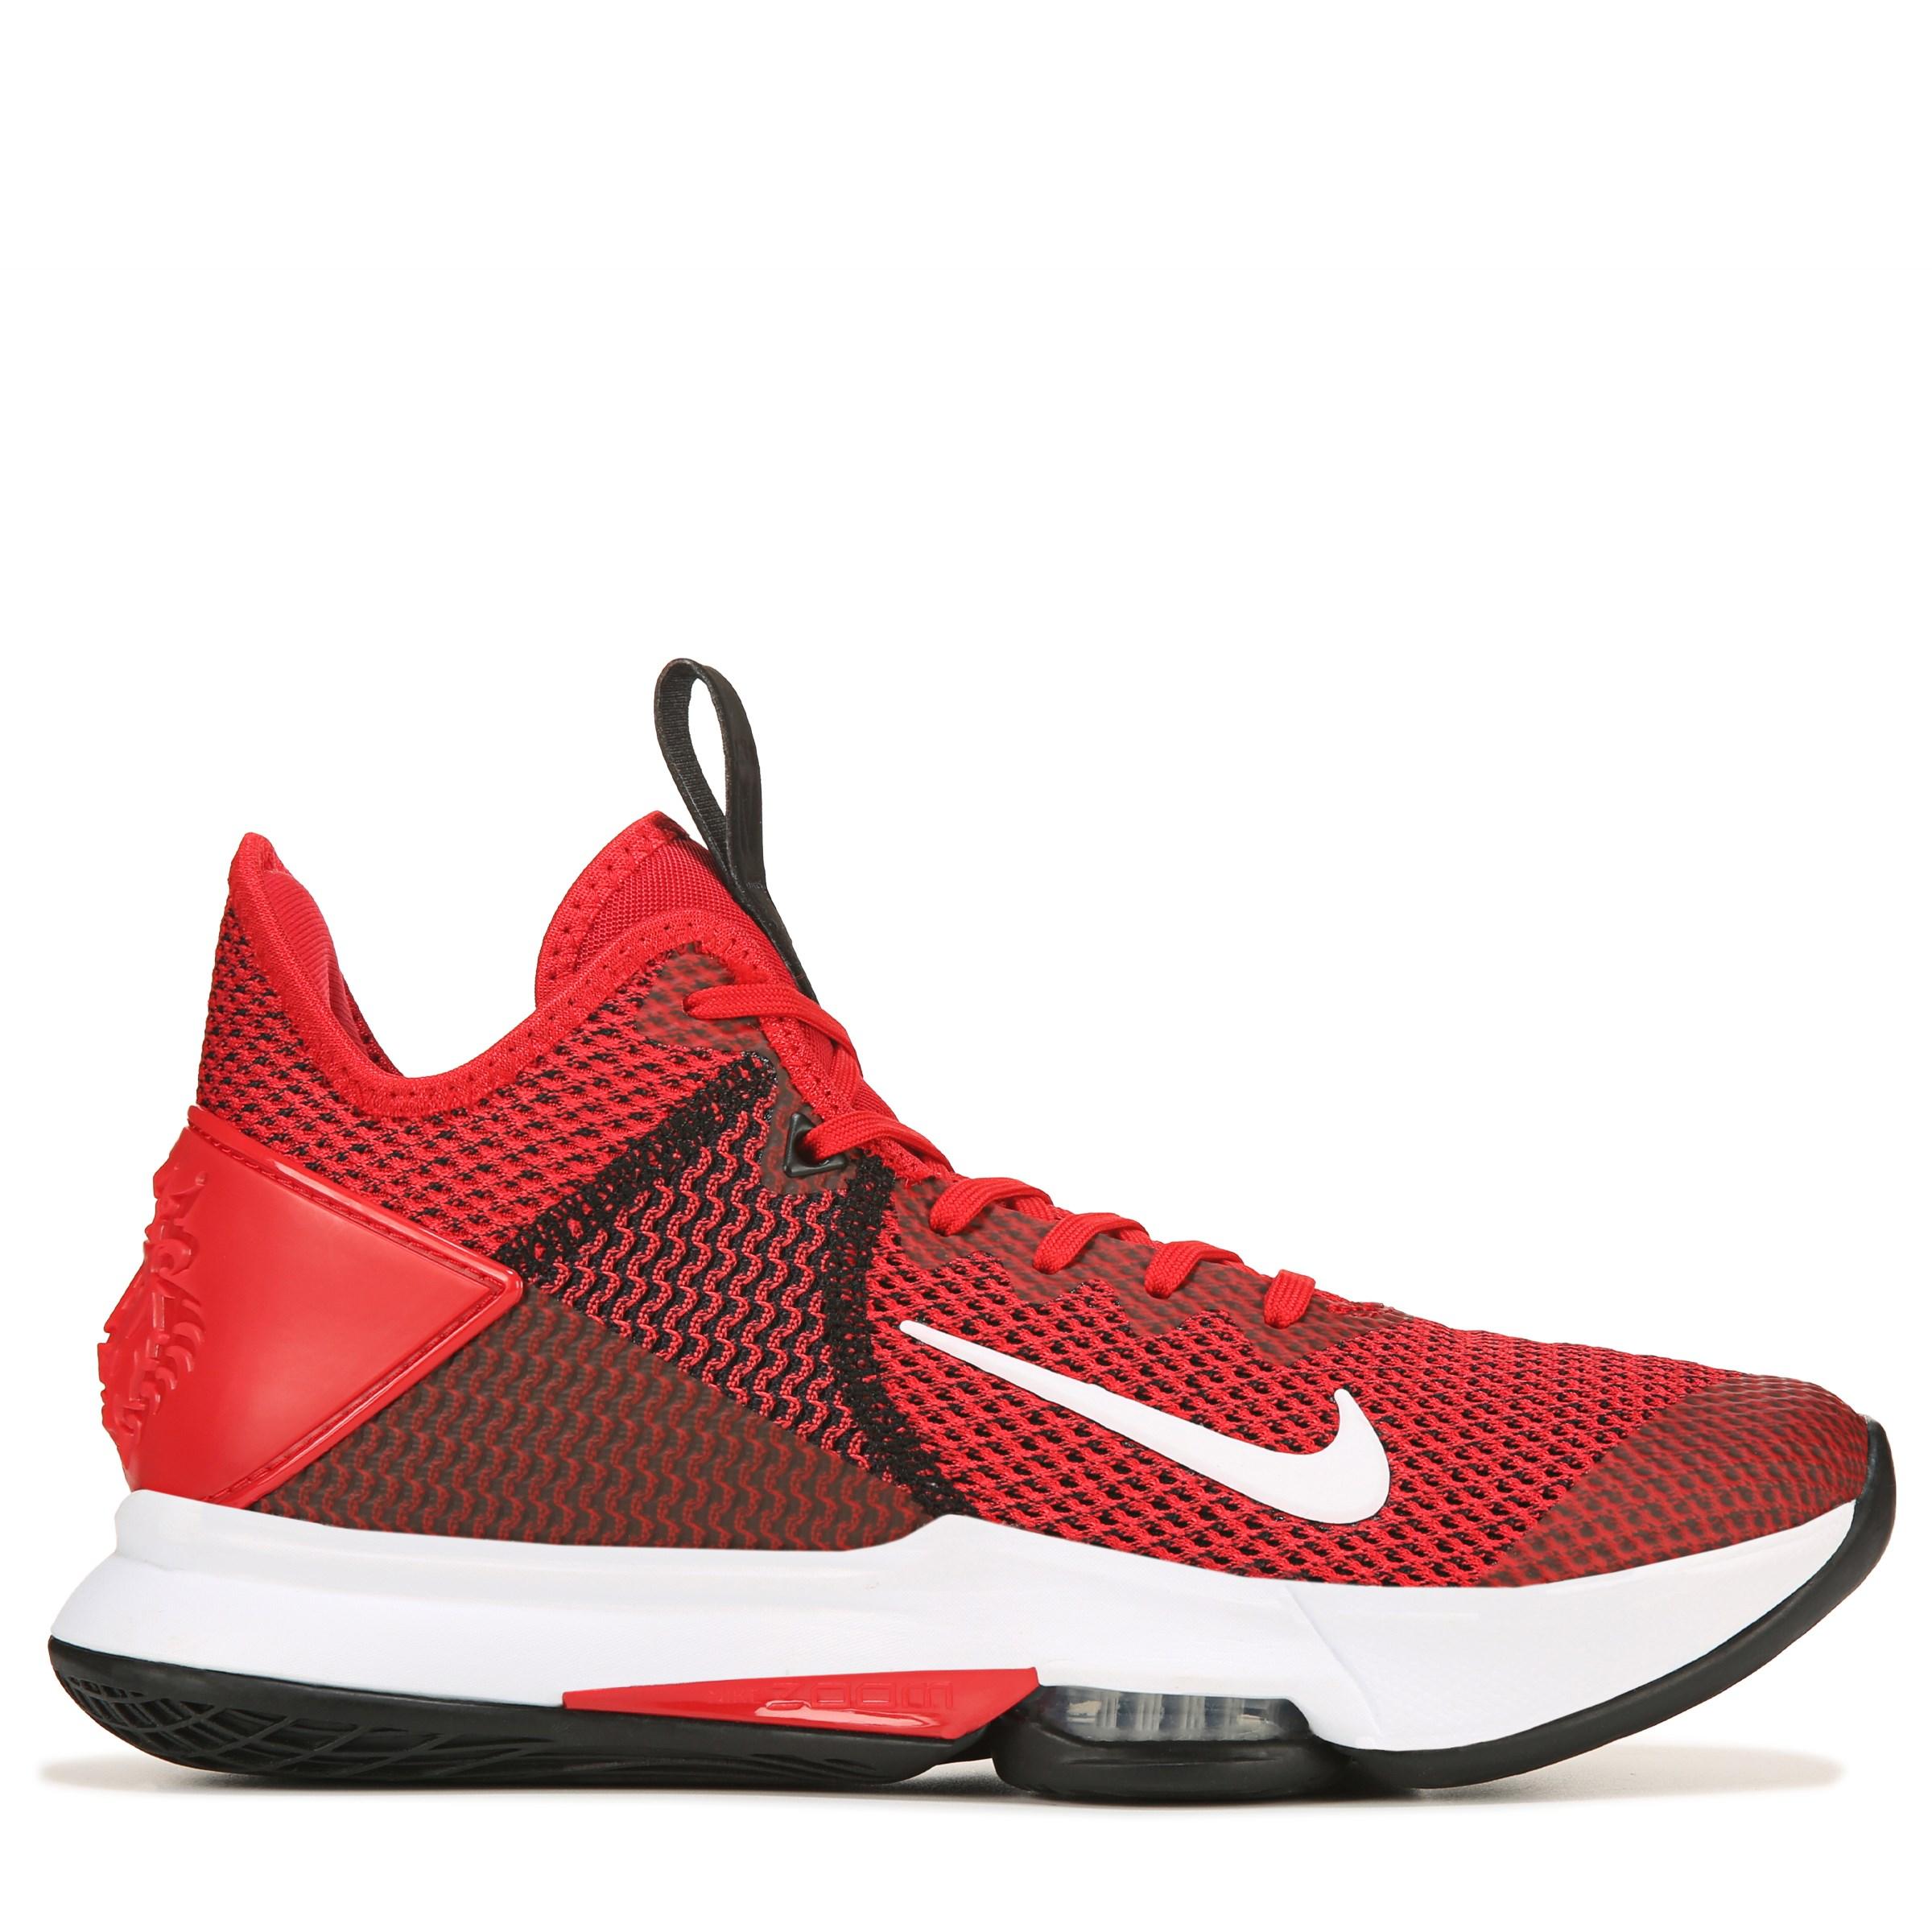 Nike Synthetic Lebron Witness Iv Basketball Shoes in Red for Men - Lyst